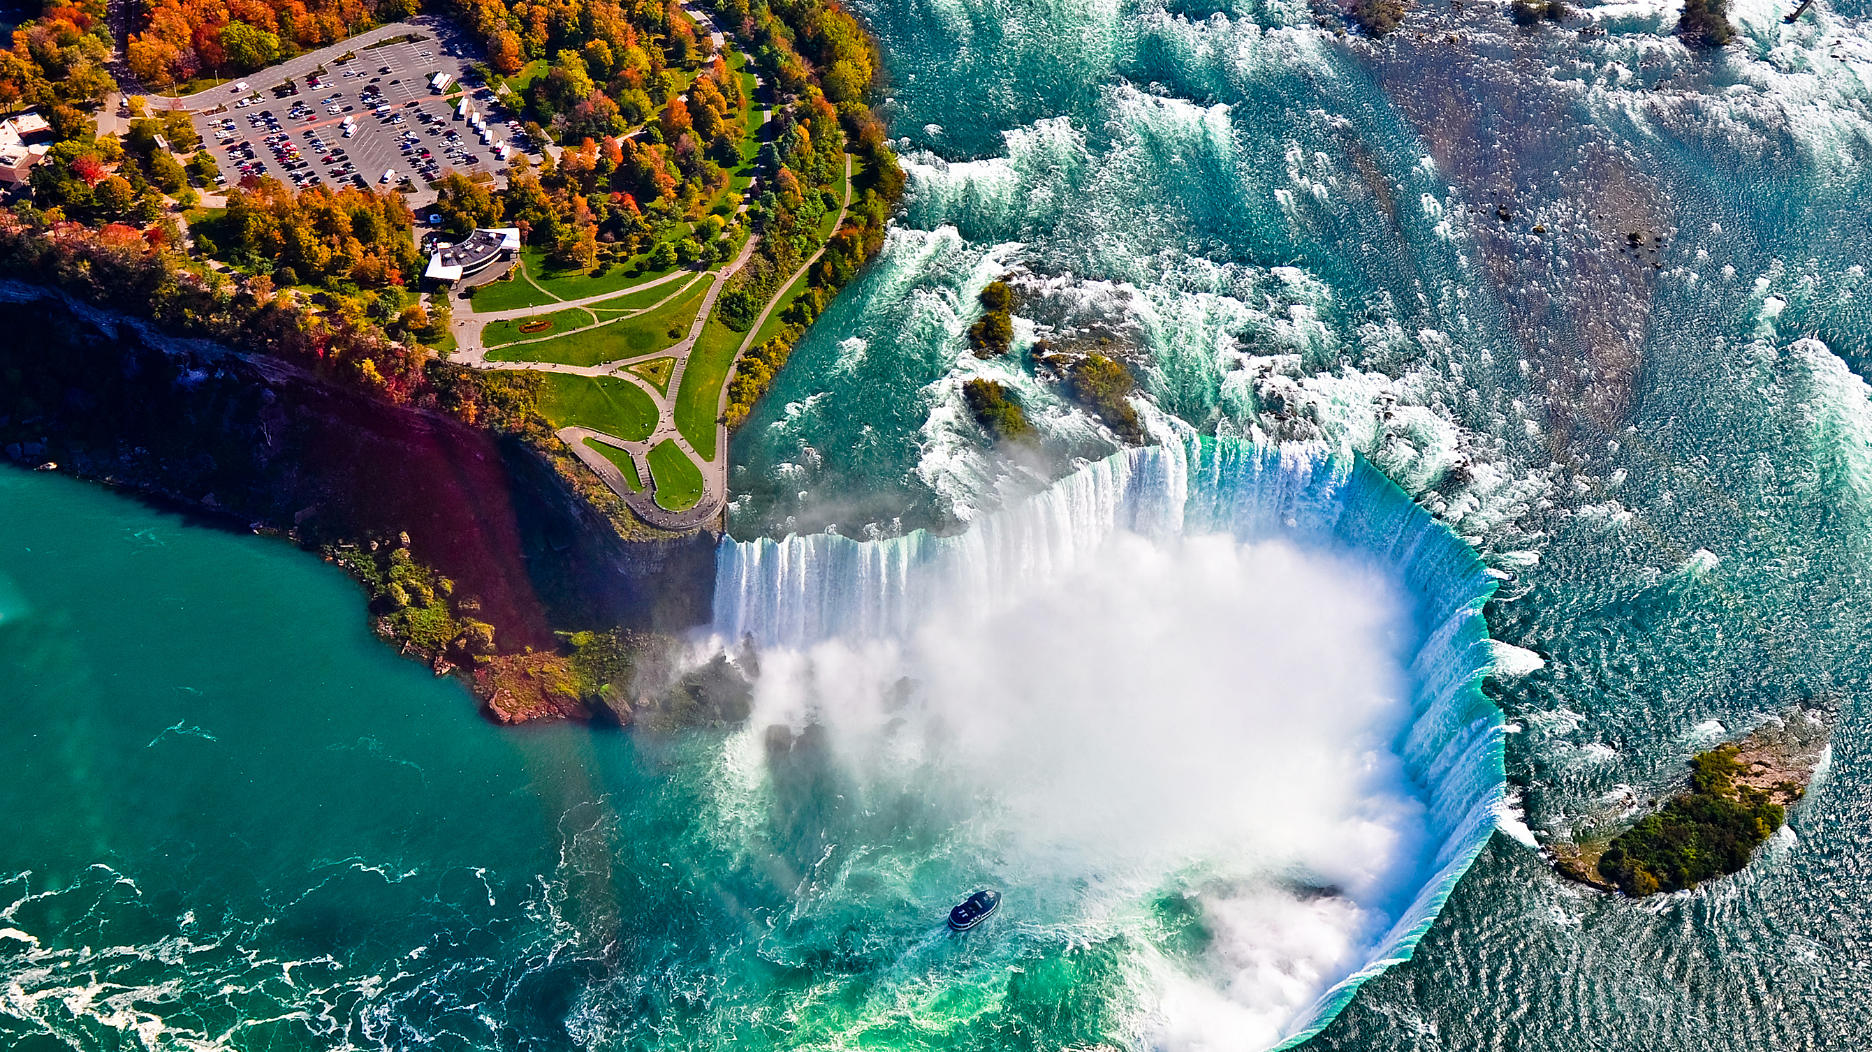 Visit Niagara Falls by helicopter